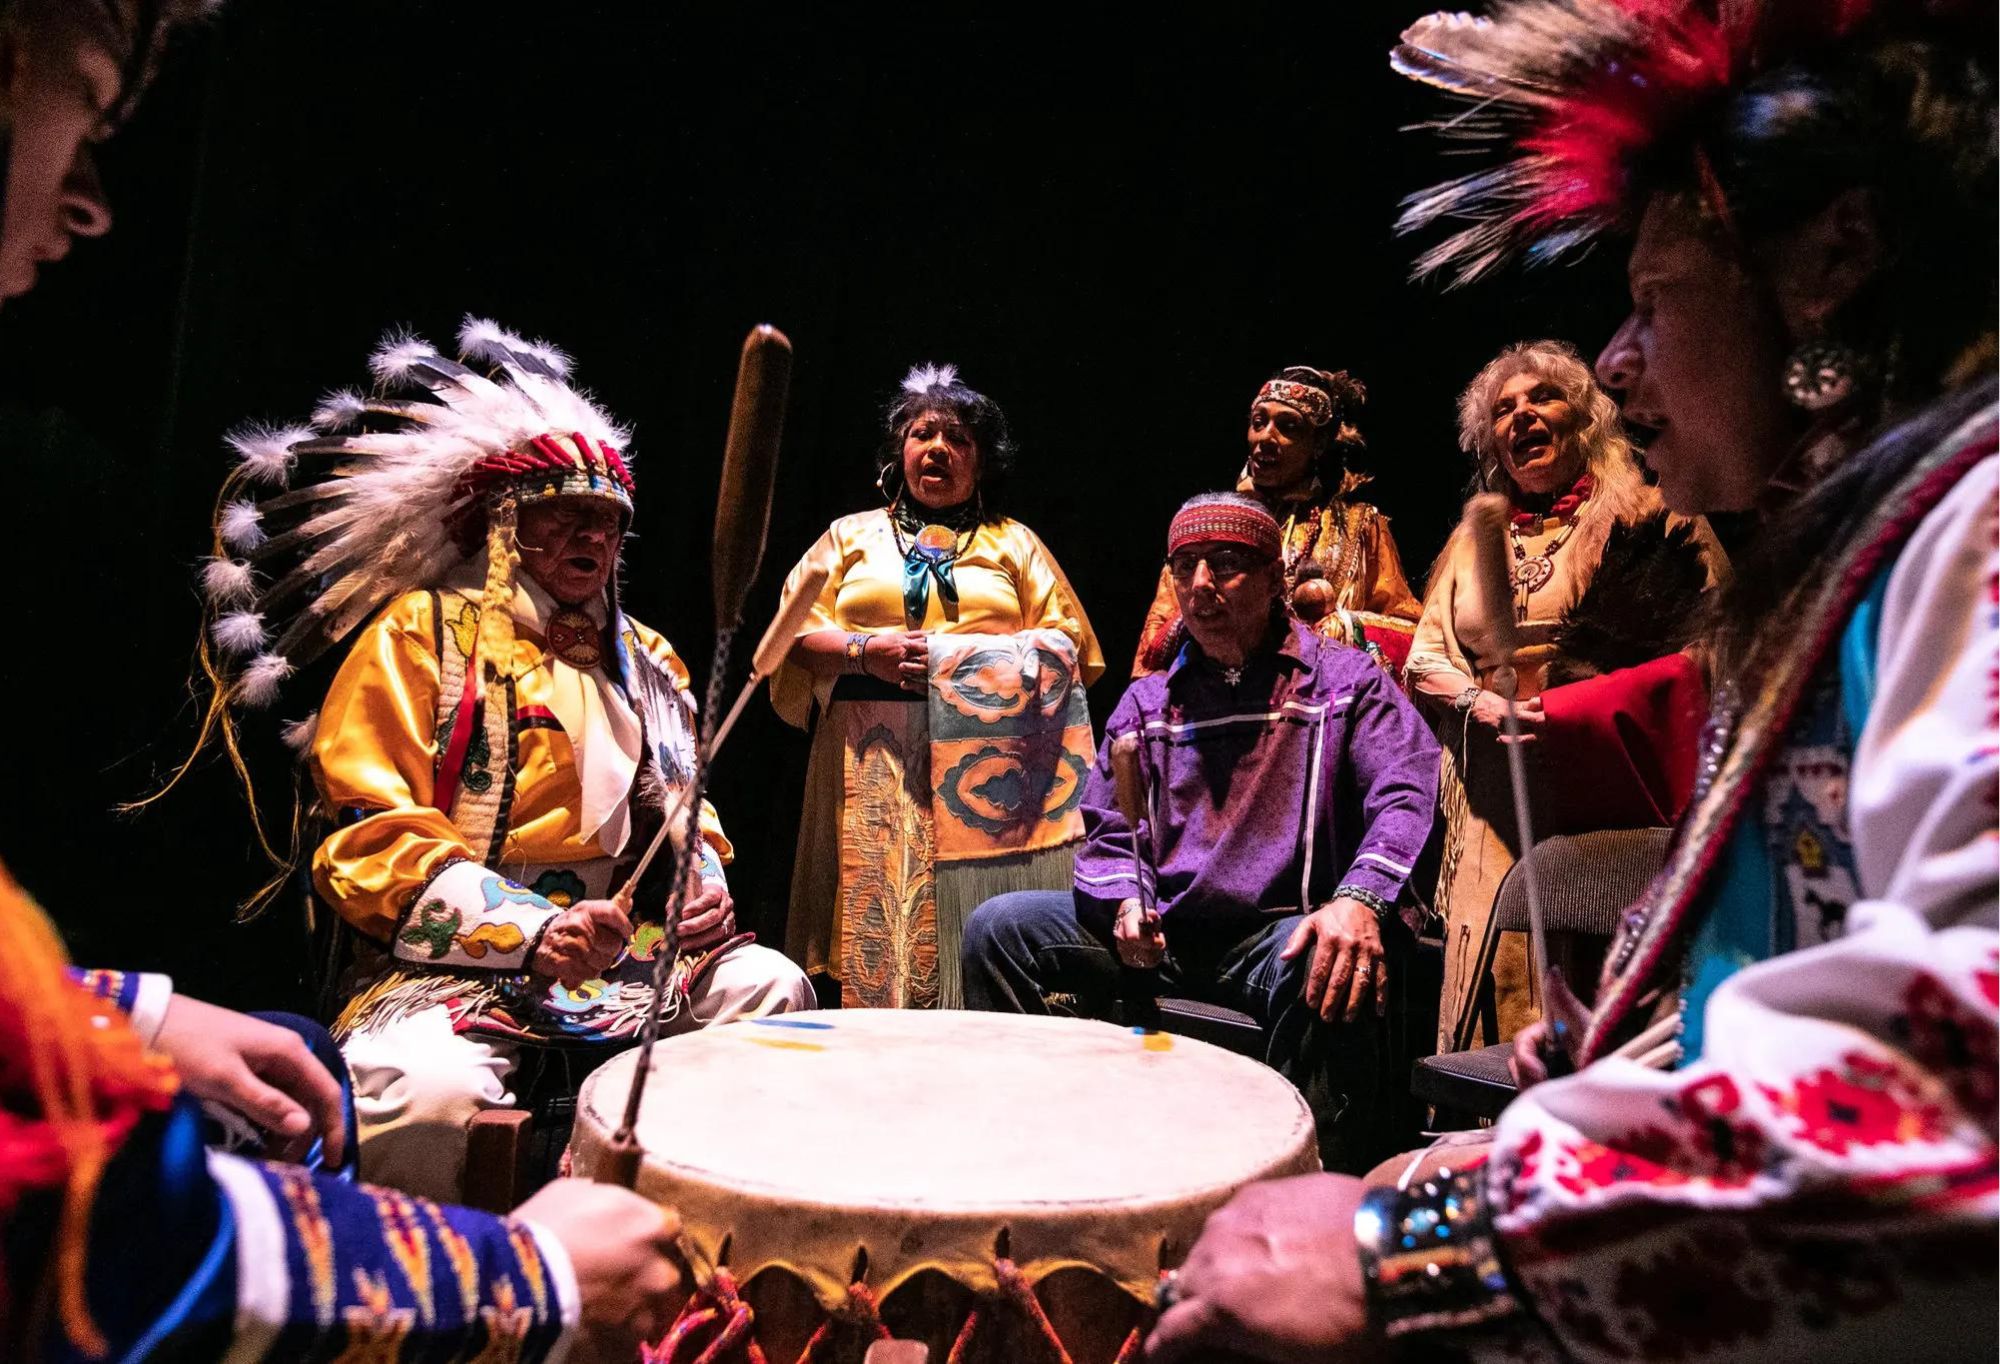 Indigenous performers in various regalia seated around a drum